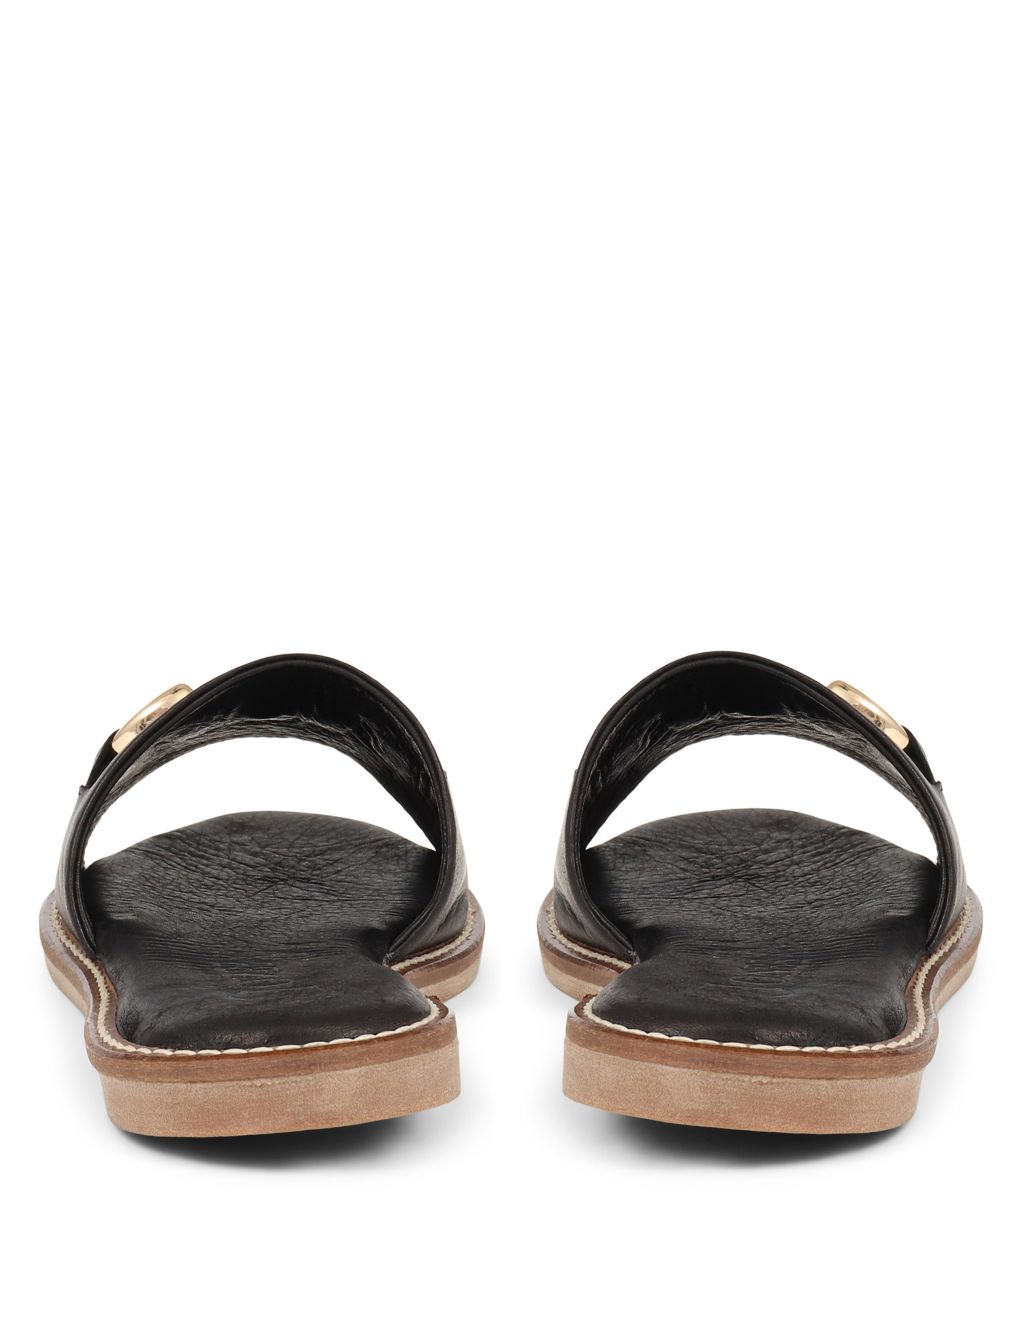 Leather Ring Detail Flat Mules image 3